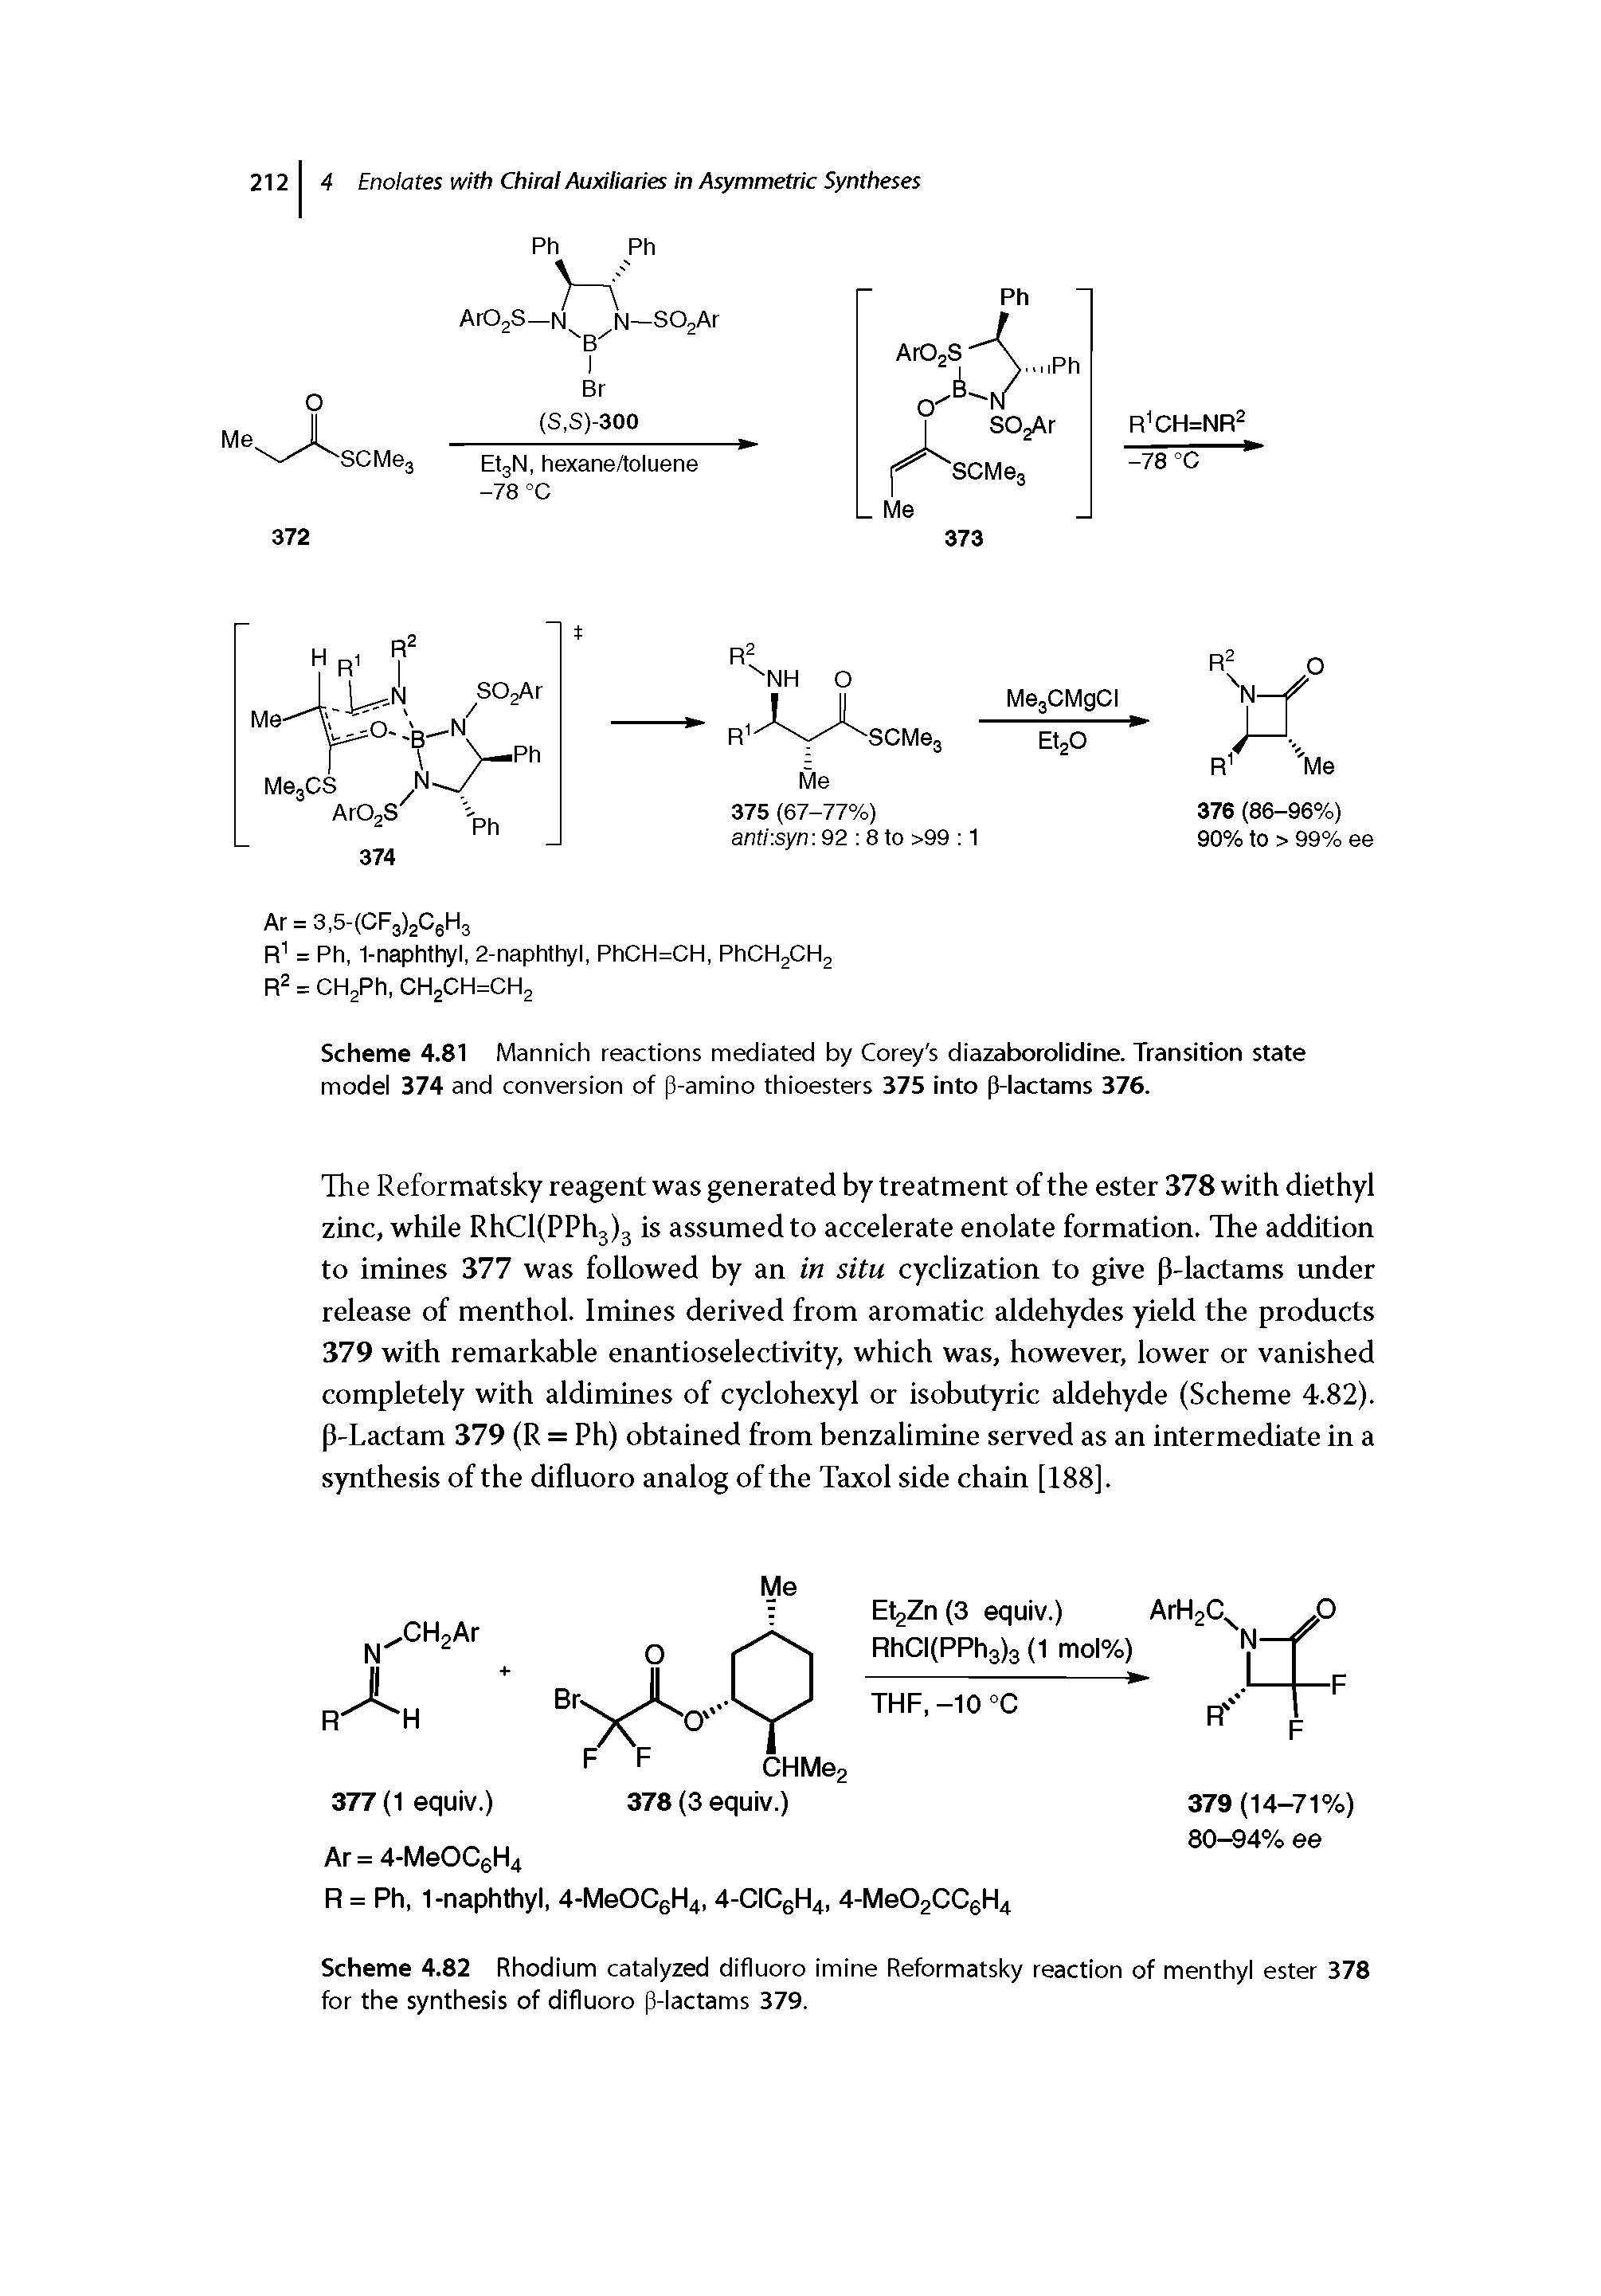 Scheme 4.81 Mannich reactions mediated by Corey s diazaborolidine. Transition state model 374 and conversion of p-amino thioesters 375 into p-lactams 376.